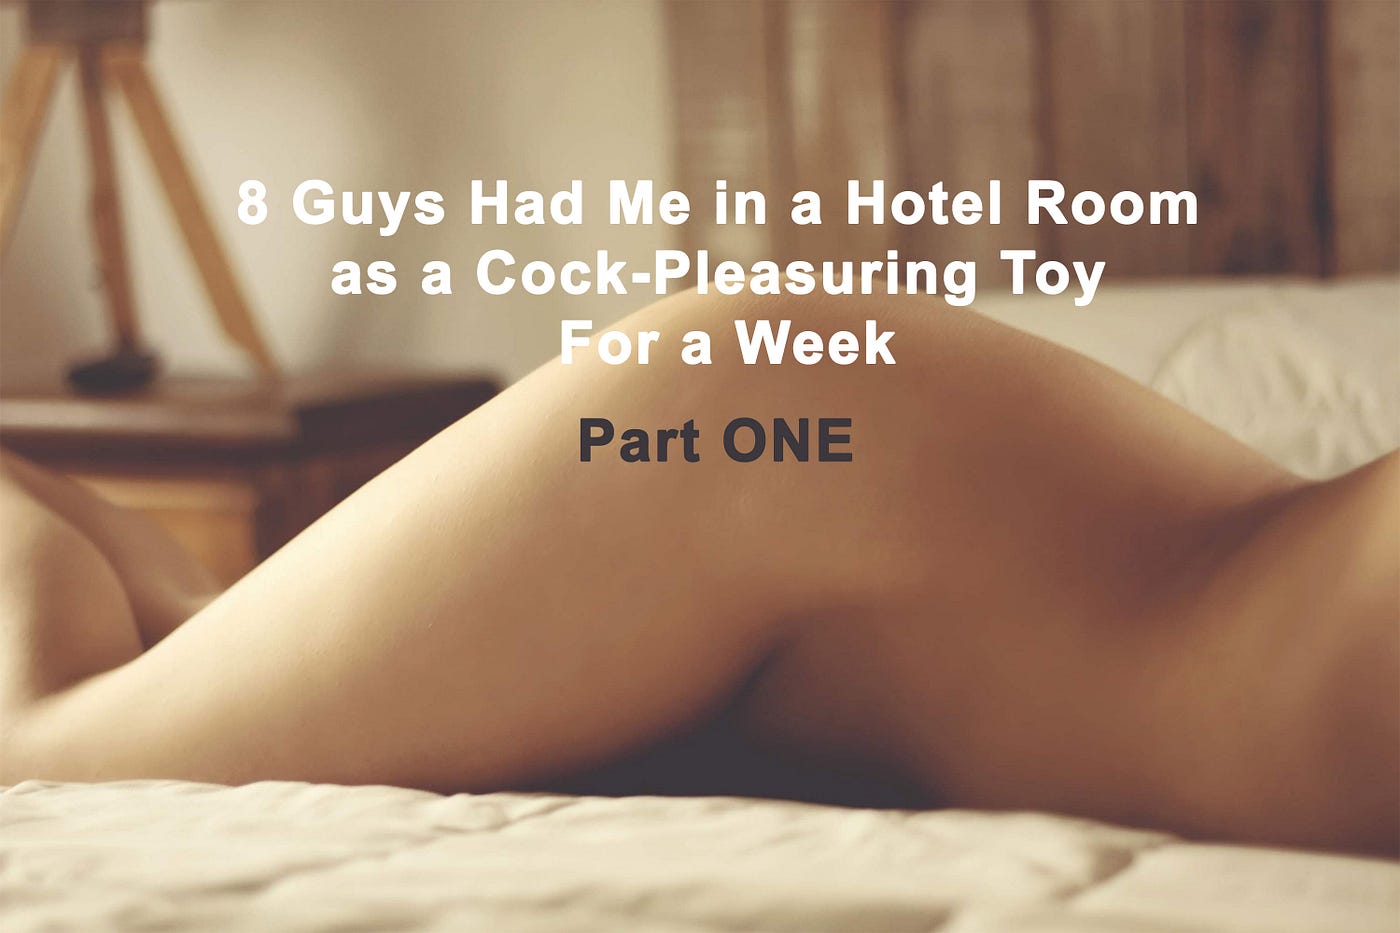 8 Guys Had Me In a Hotel Room as a Cock-Pleasuring Toy For a Week Part 1 by Delisha Keane Bare Skin Cafe Medium photo